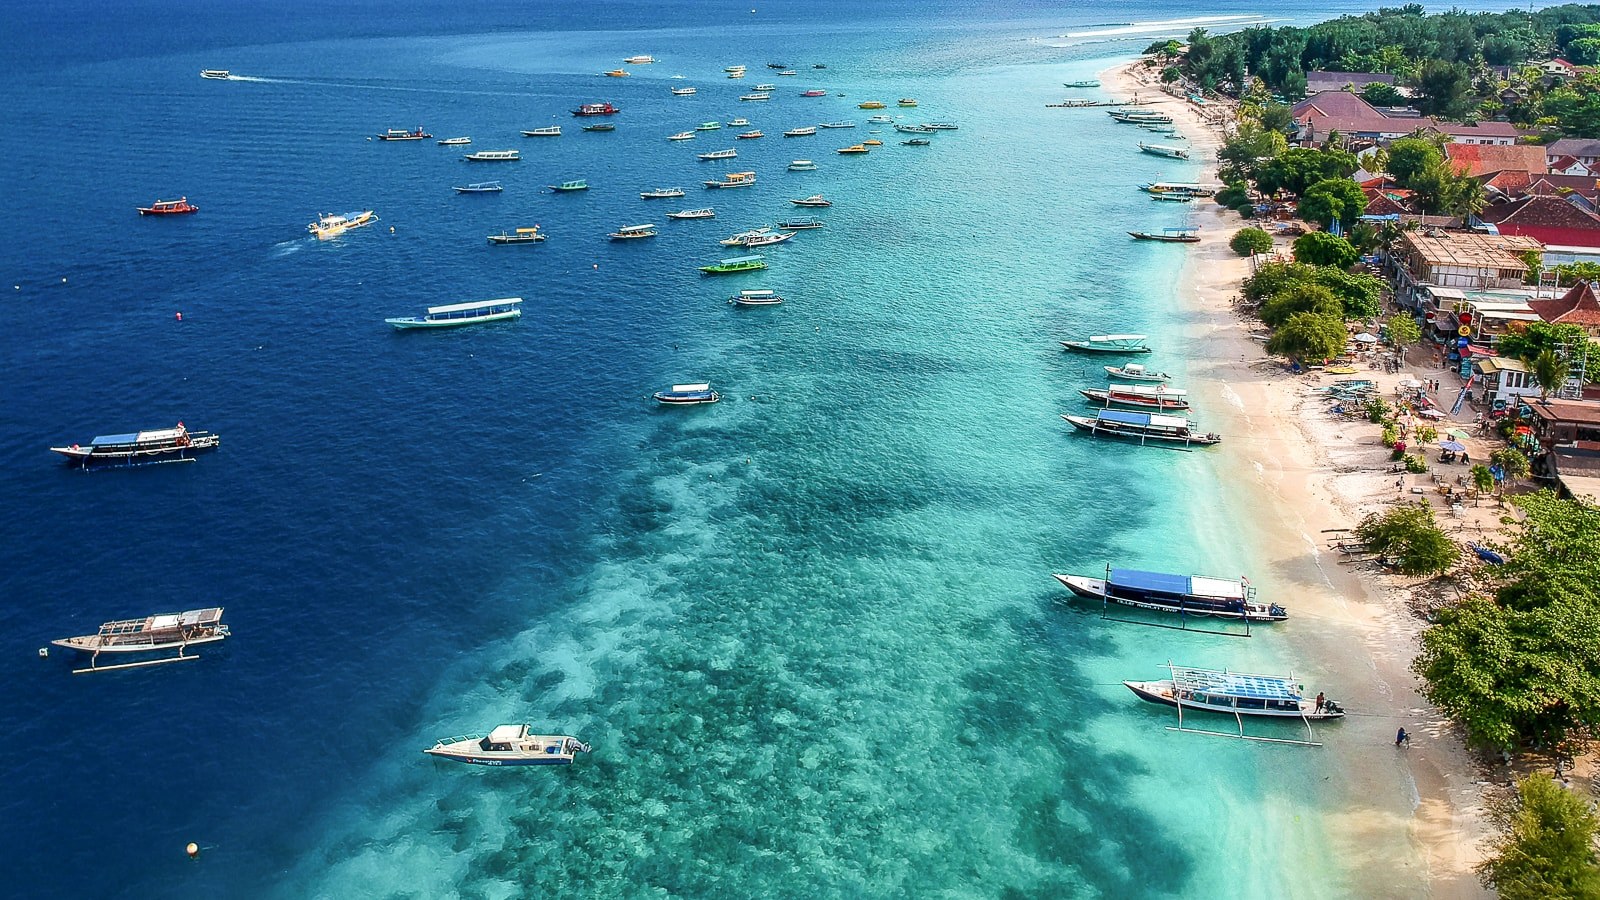 Gili Islands Diving and Relaxation Paradise